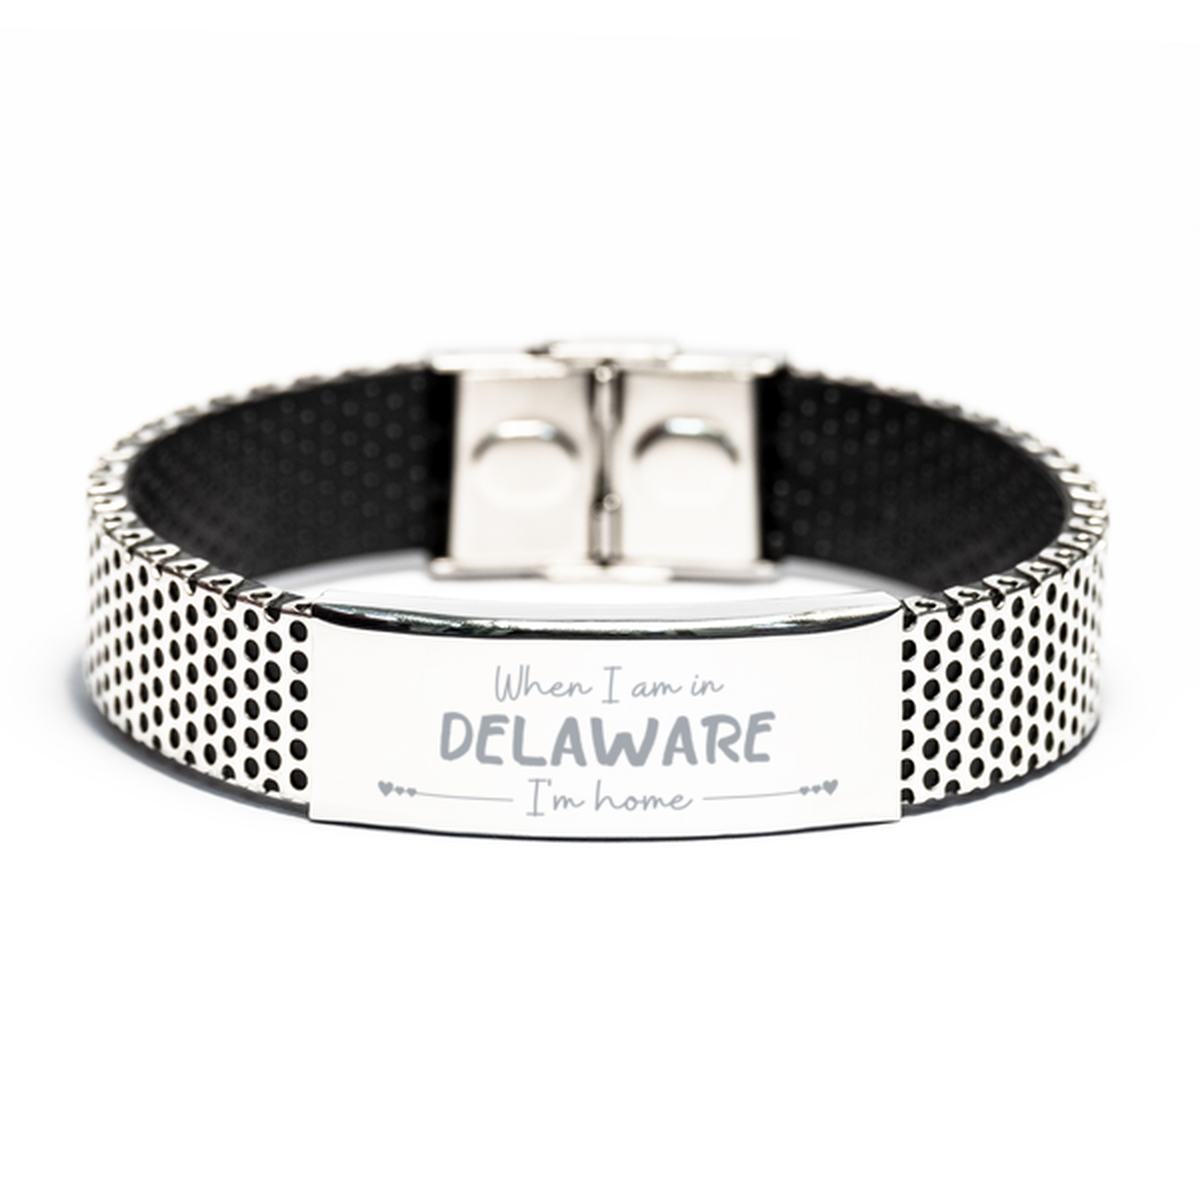 When I am in Delaware I'm home Stainless Steel Bracelet, Cheap Gifts For Delaware, State Delaware Birthday Gifts for Friends Coworker